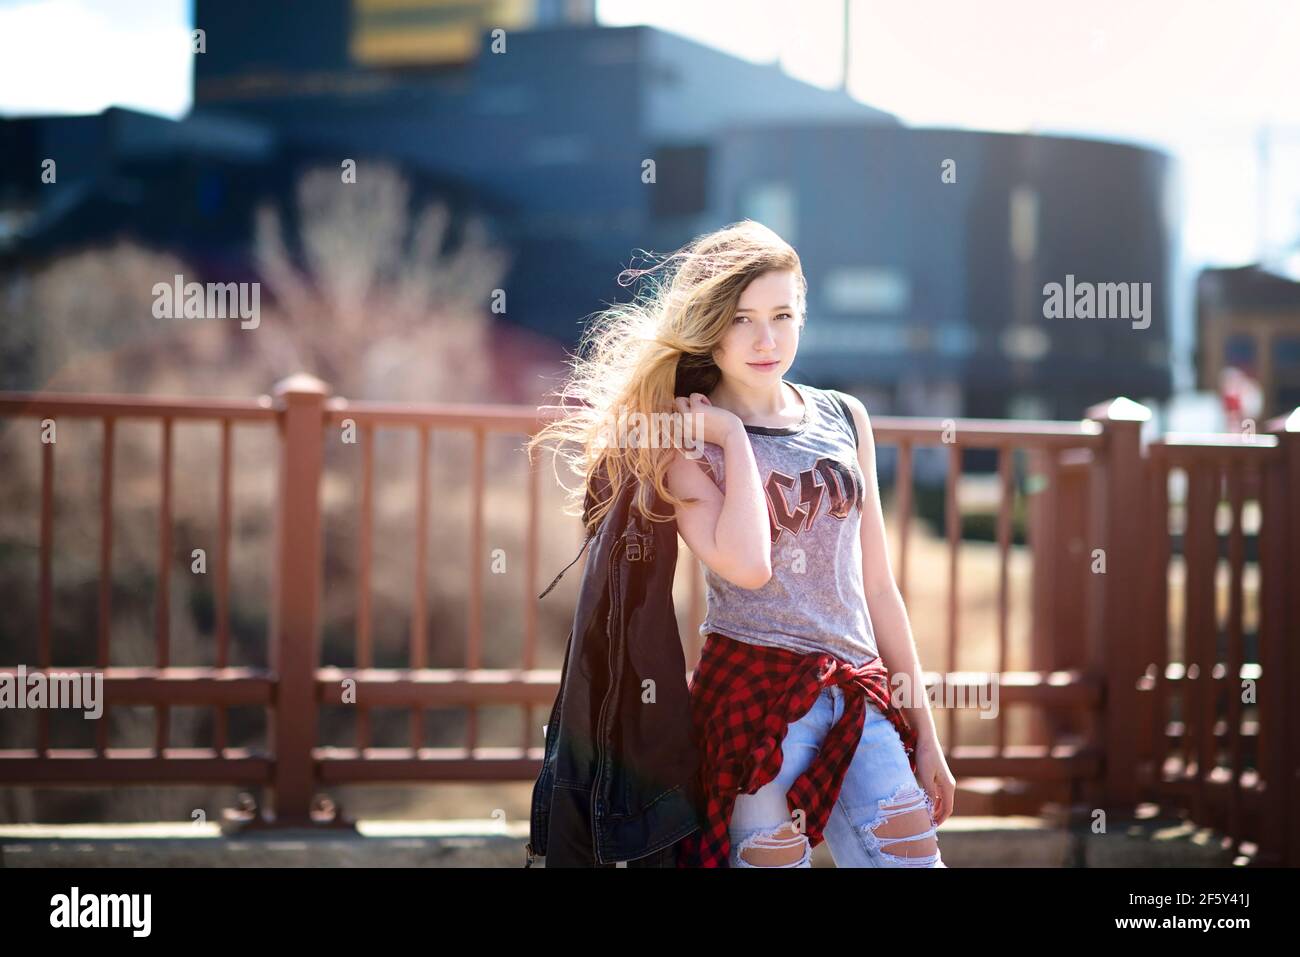 Teen girl with long hair holding leather jacket in urban setting. Stock Photo